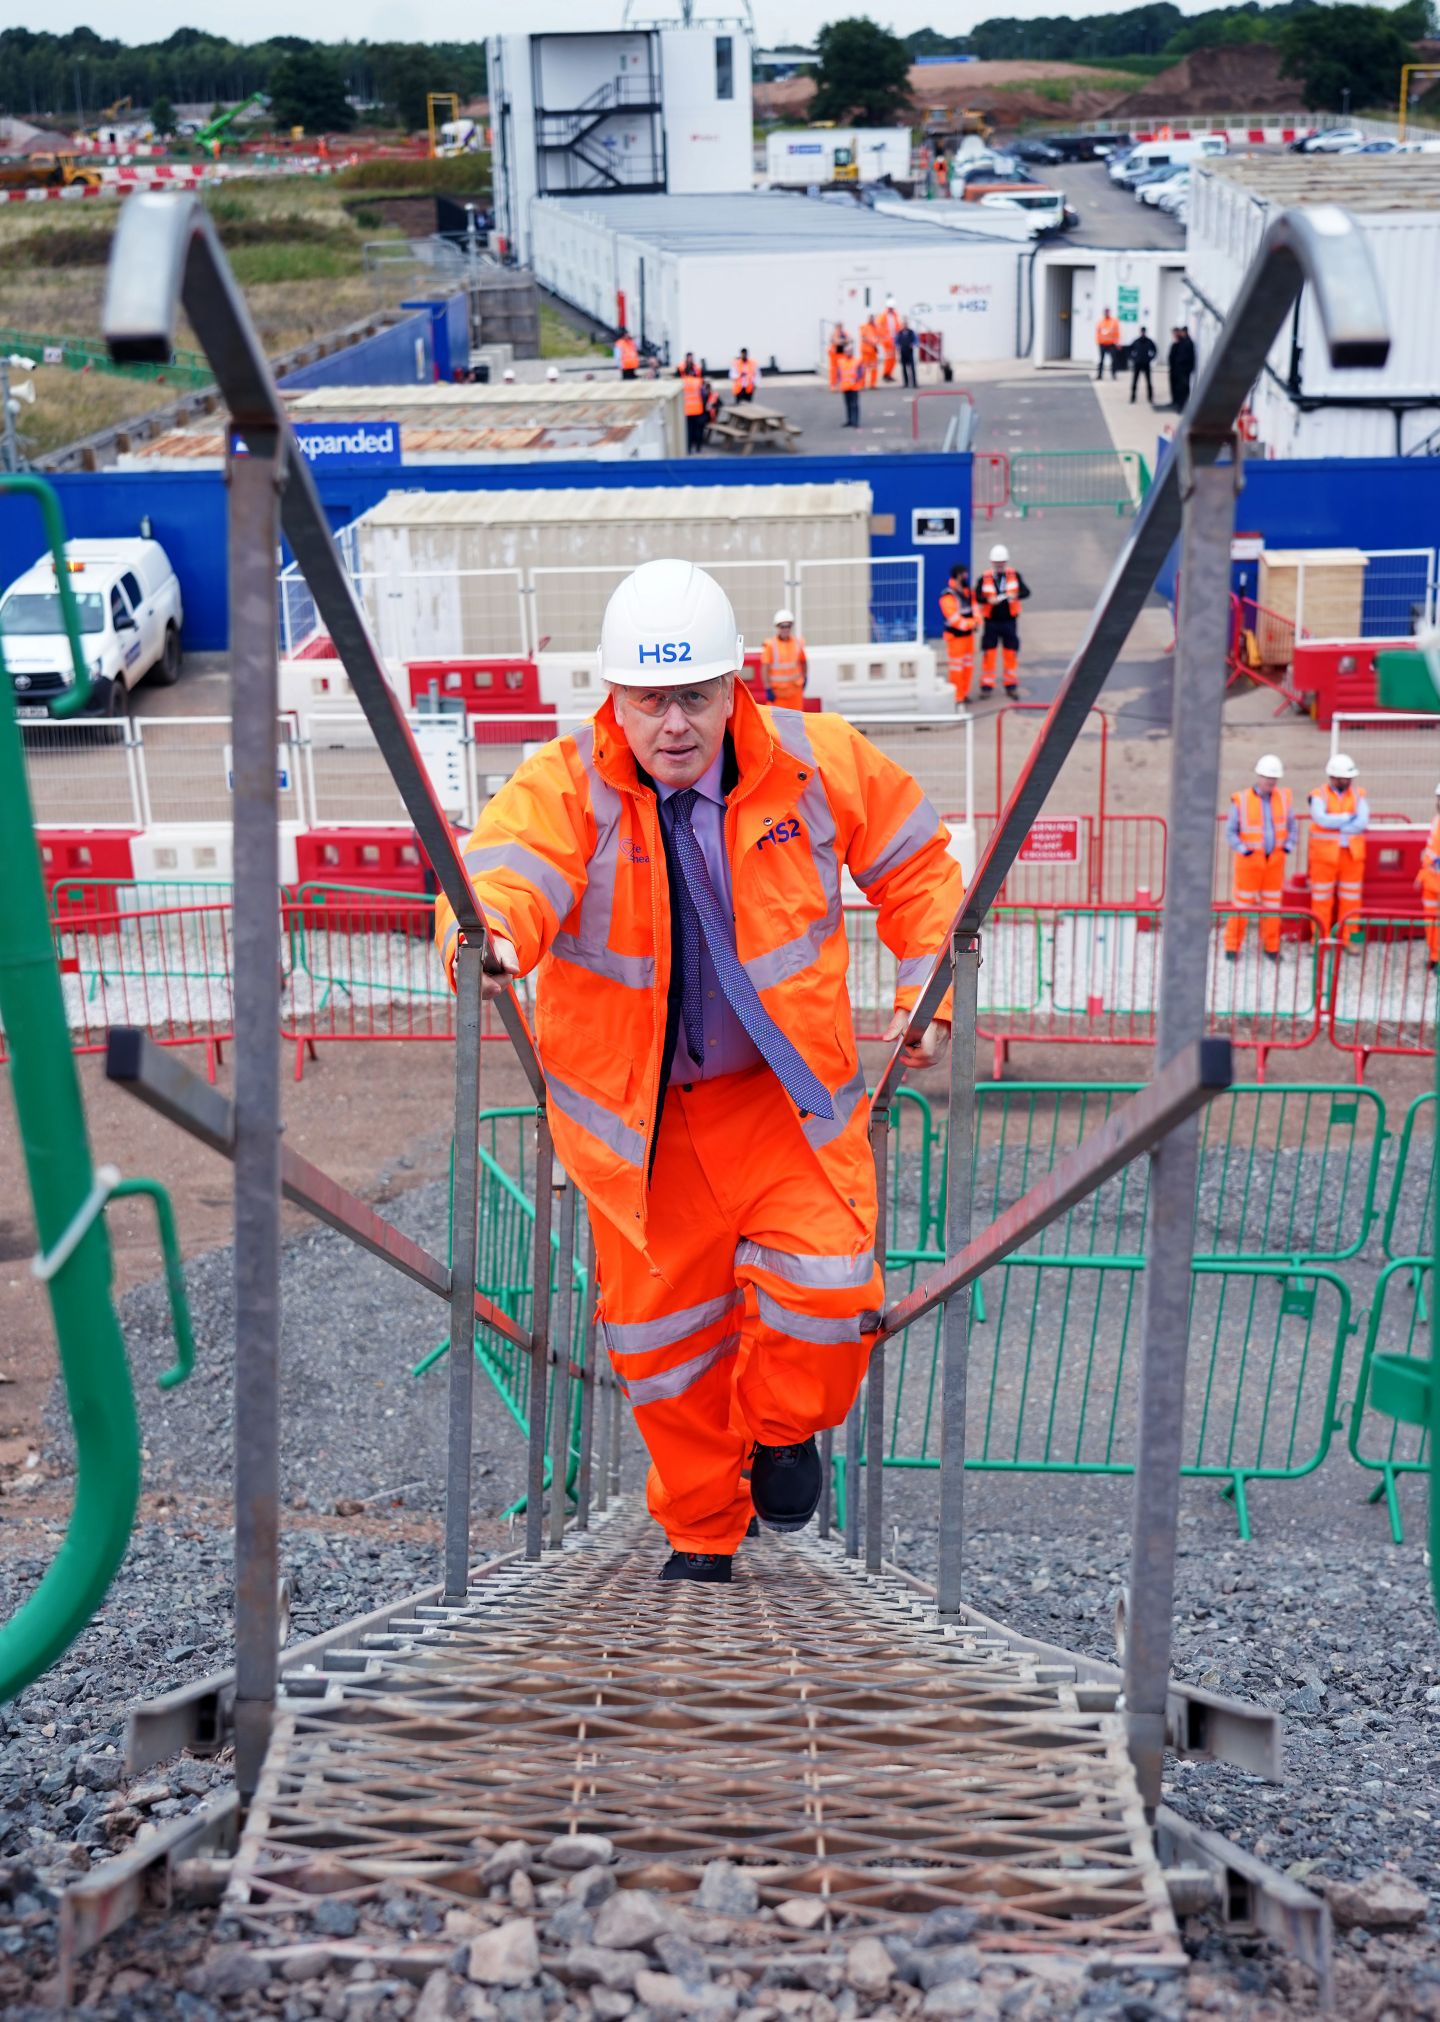 An image of former Prime Minister Boris Johnson in bright orange construction clothing climbing up a metal stairway. Behind him is a construction site.